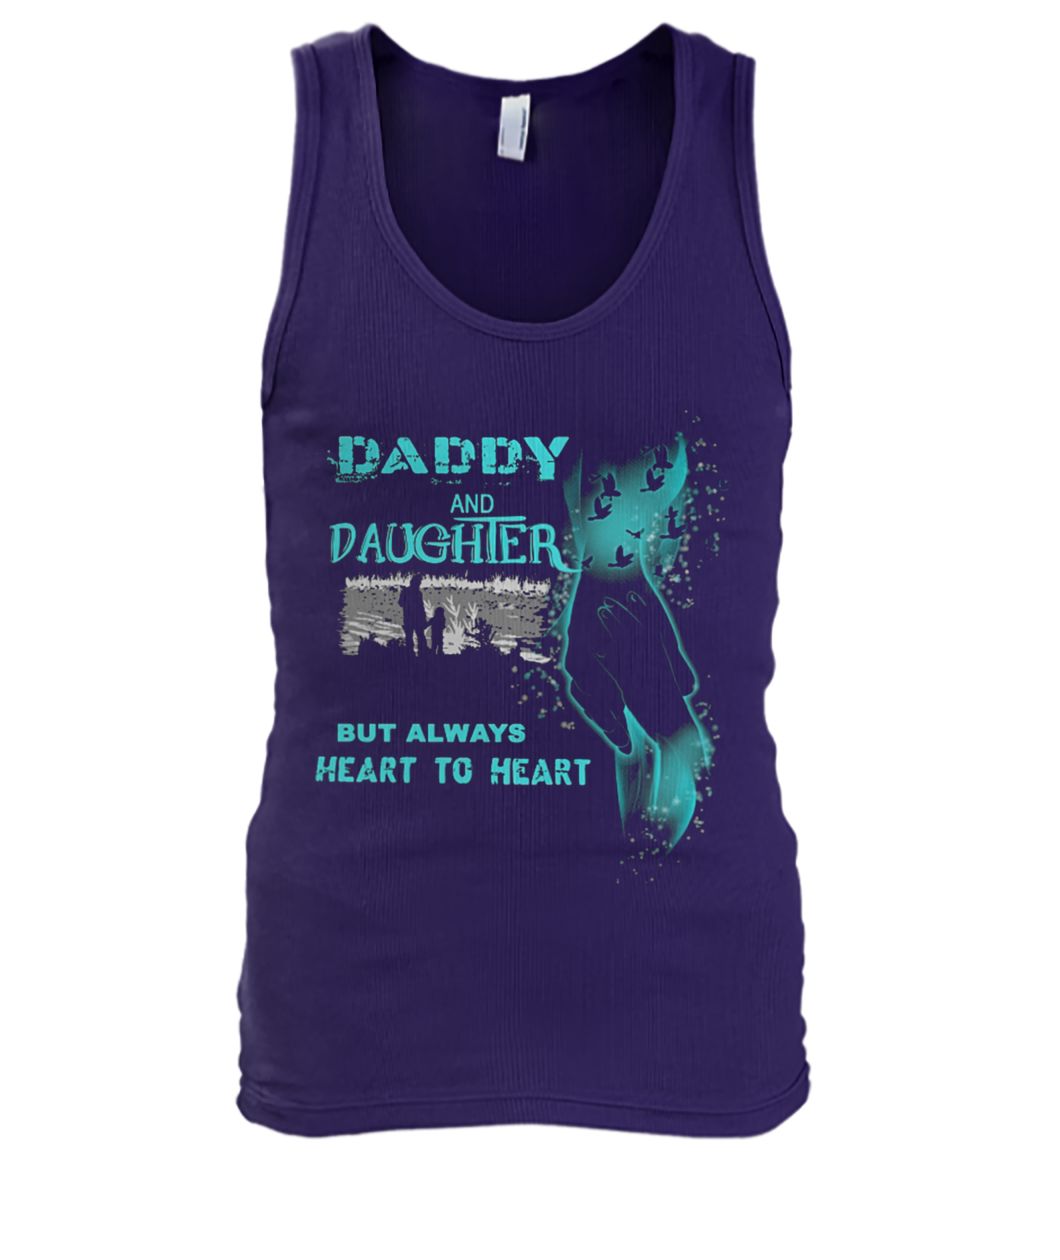 Daddy and daughter but always heart to heart men's tank top